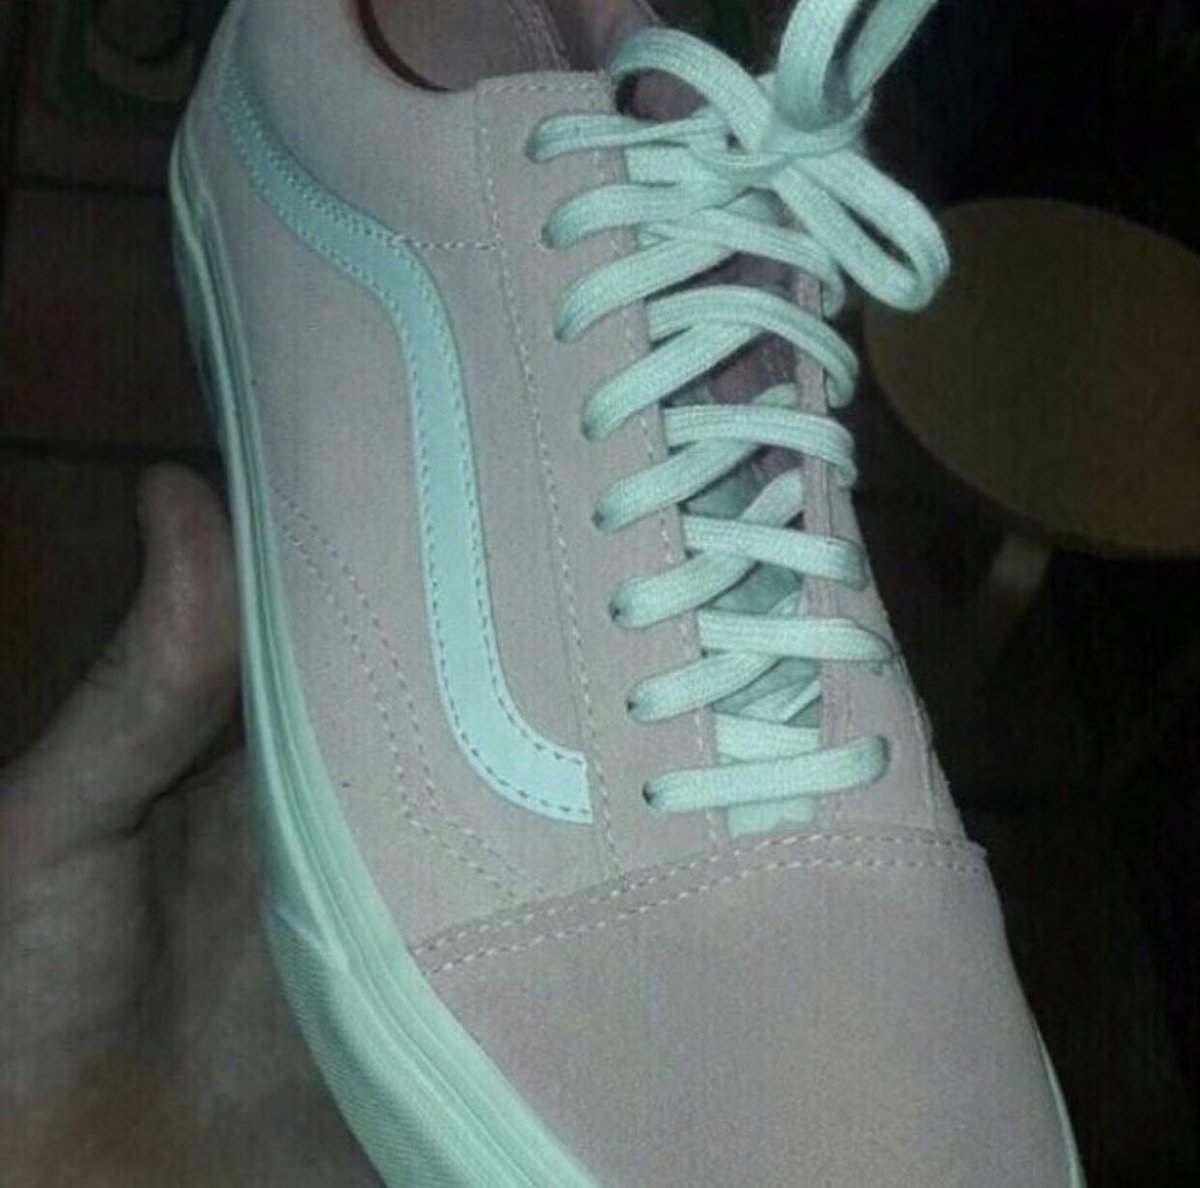 Is this shoe pink or grey?